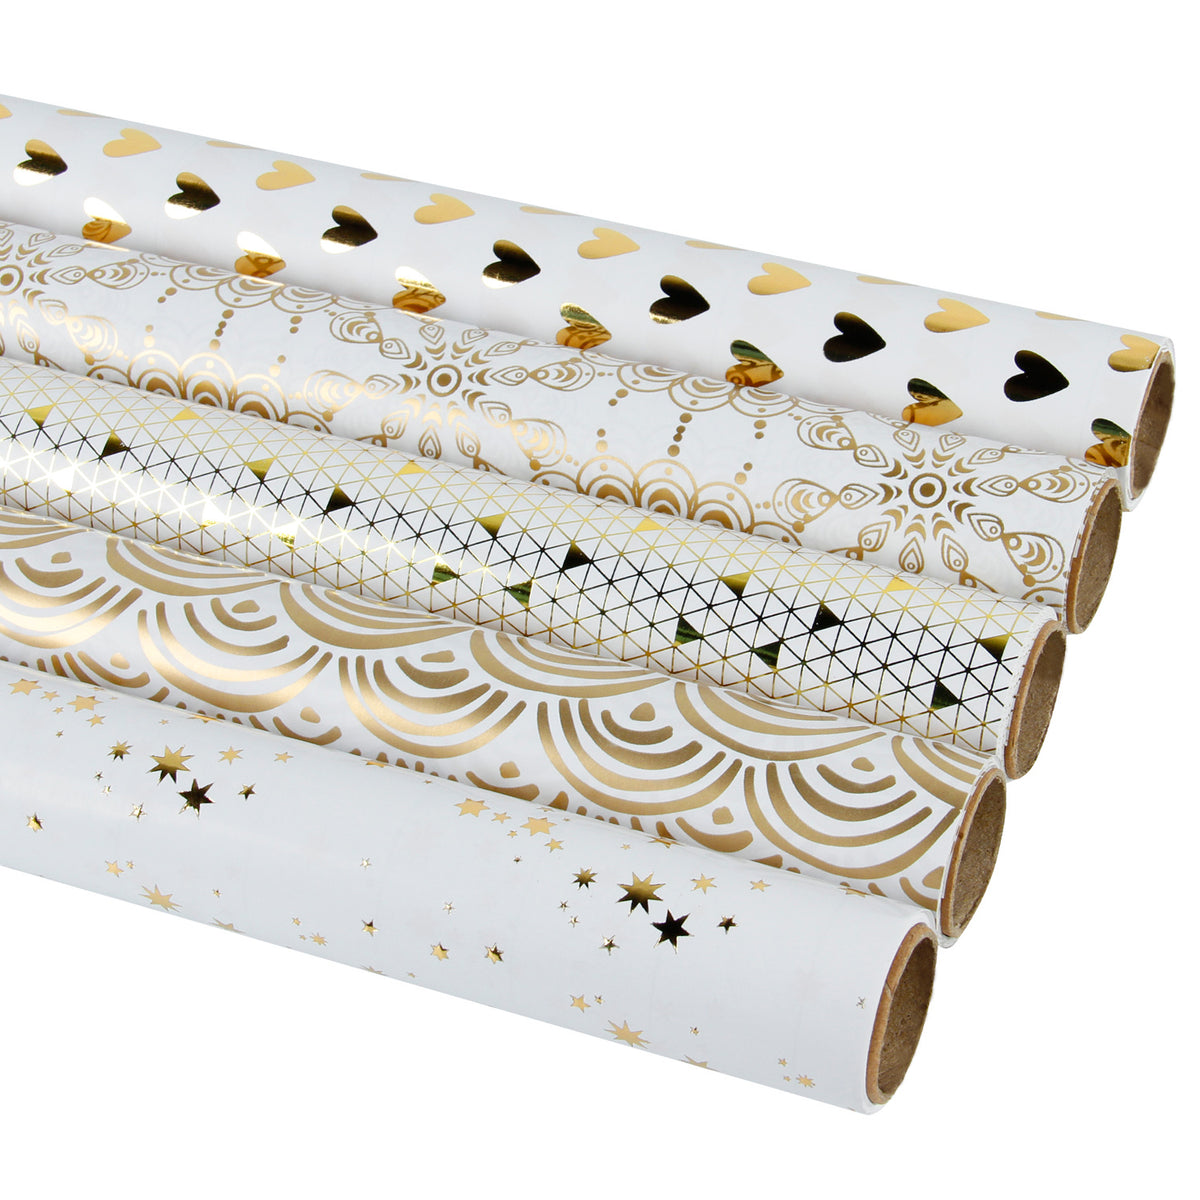 White/Gold Foil Stars Wrapping Paper Roll 30inch x 10ft roll 